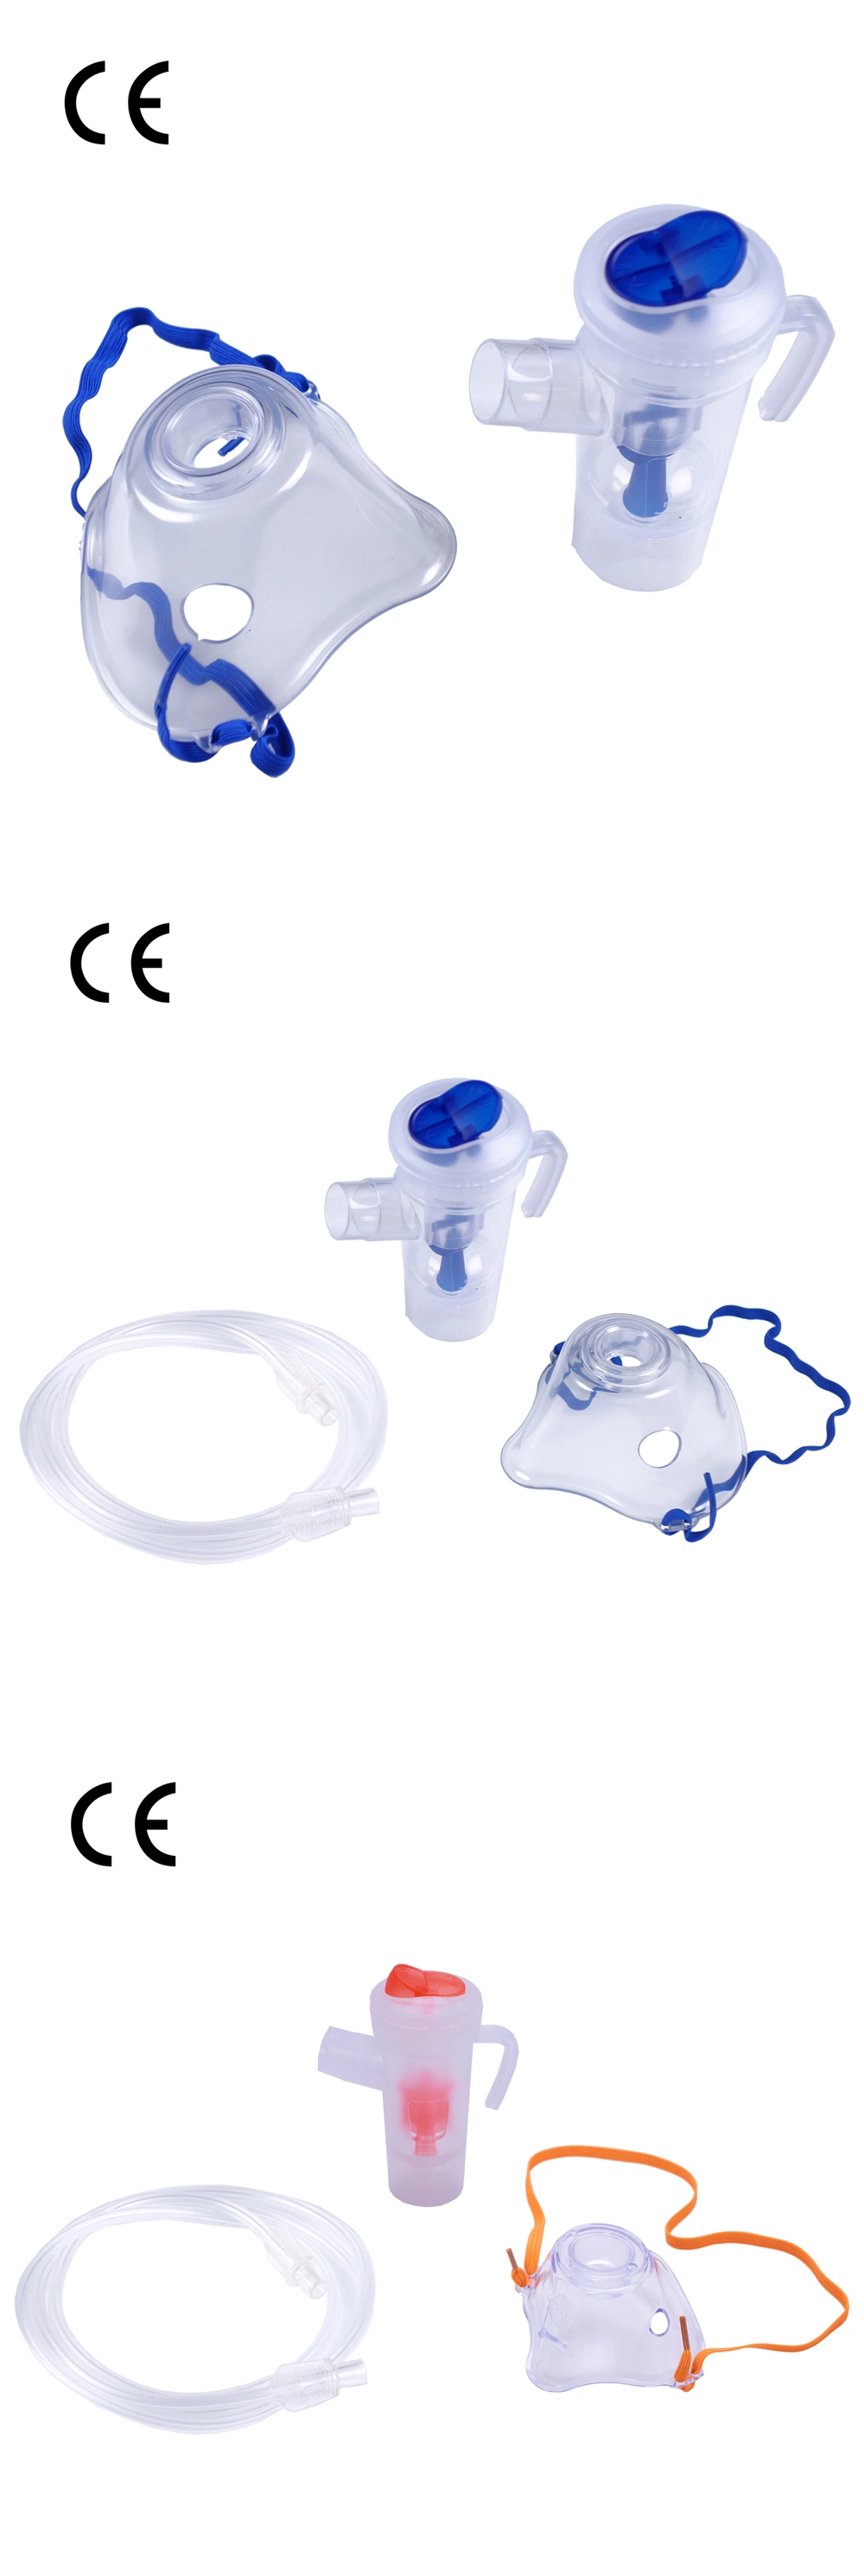 Sterile Medical Nebulizer Set Nebulizer with Button Kit Nebulizer Chamber Nebulizer Cup Nebulizer Oxygen Kit with Mask for Adult/Children with CE ISO